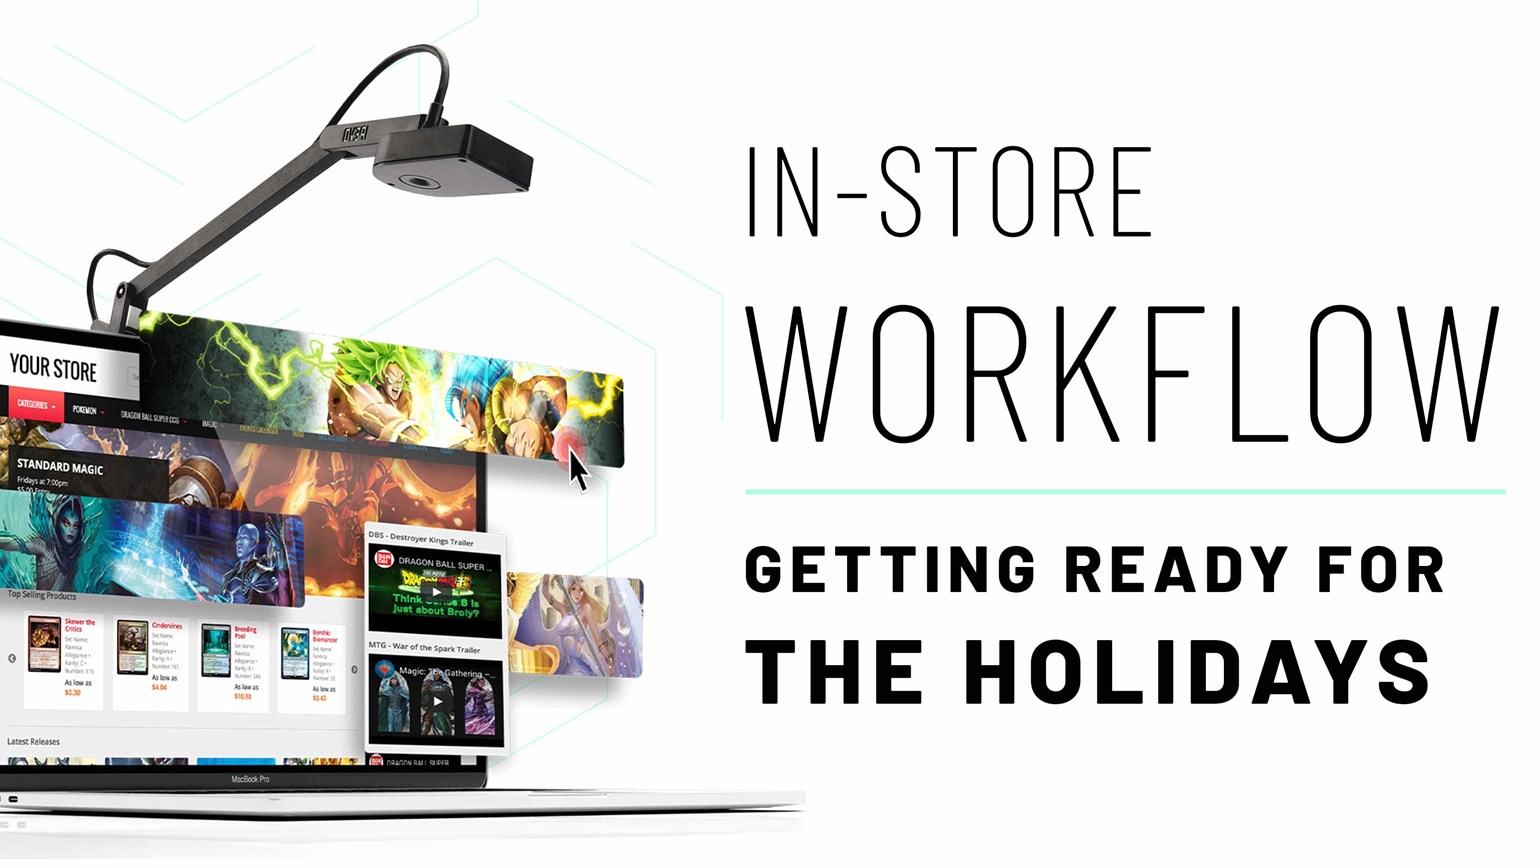 In-Store Workflow: Getting Ready for the Holidays